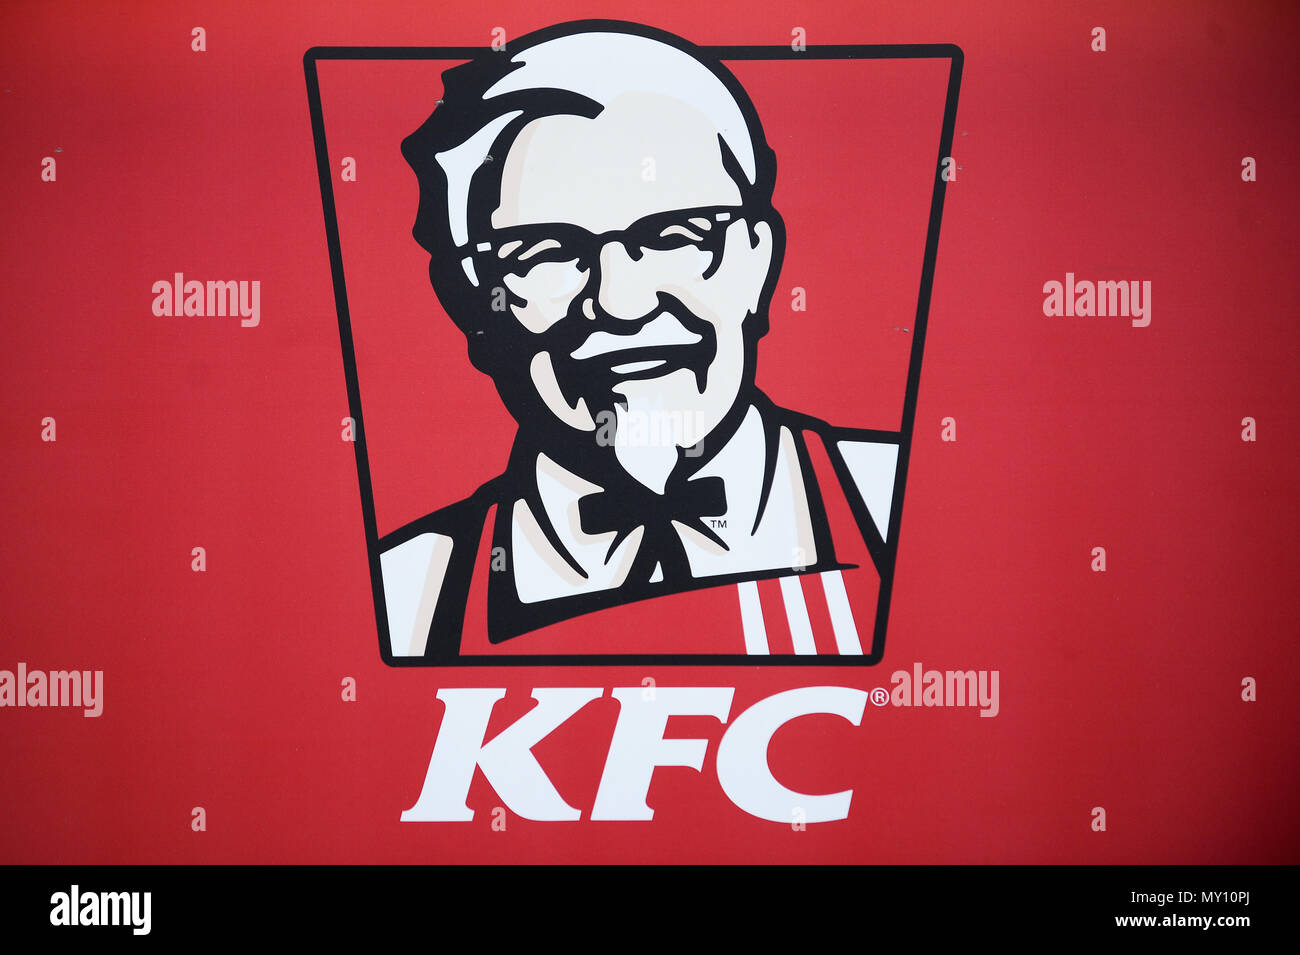 KFC logo is seen in Krakow. Krakow is a the second largest city in ...